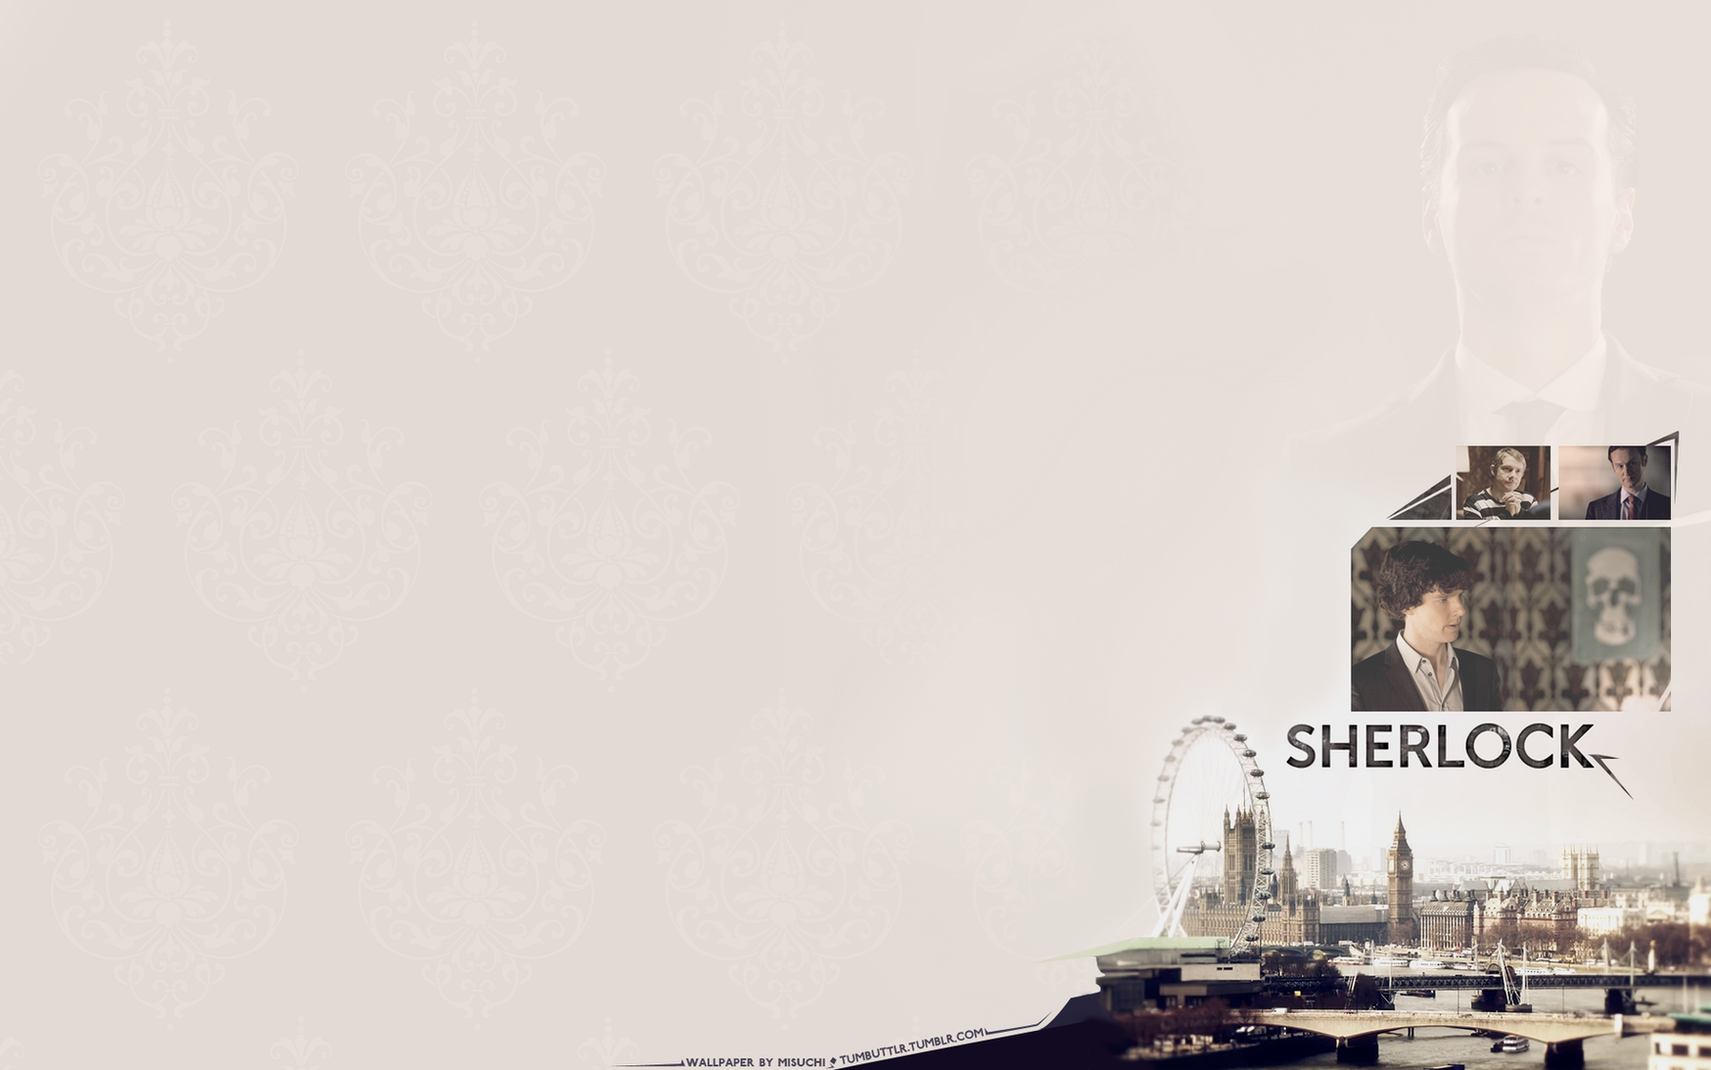 wanted a classy Sherlock wallpaper for my desktop but couldnt find